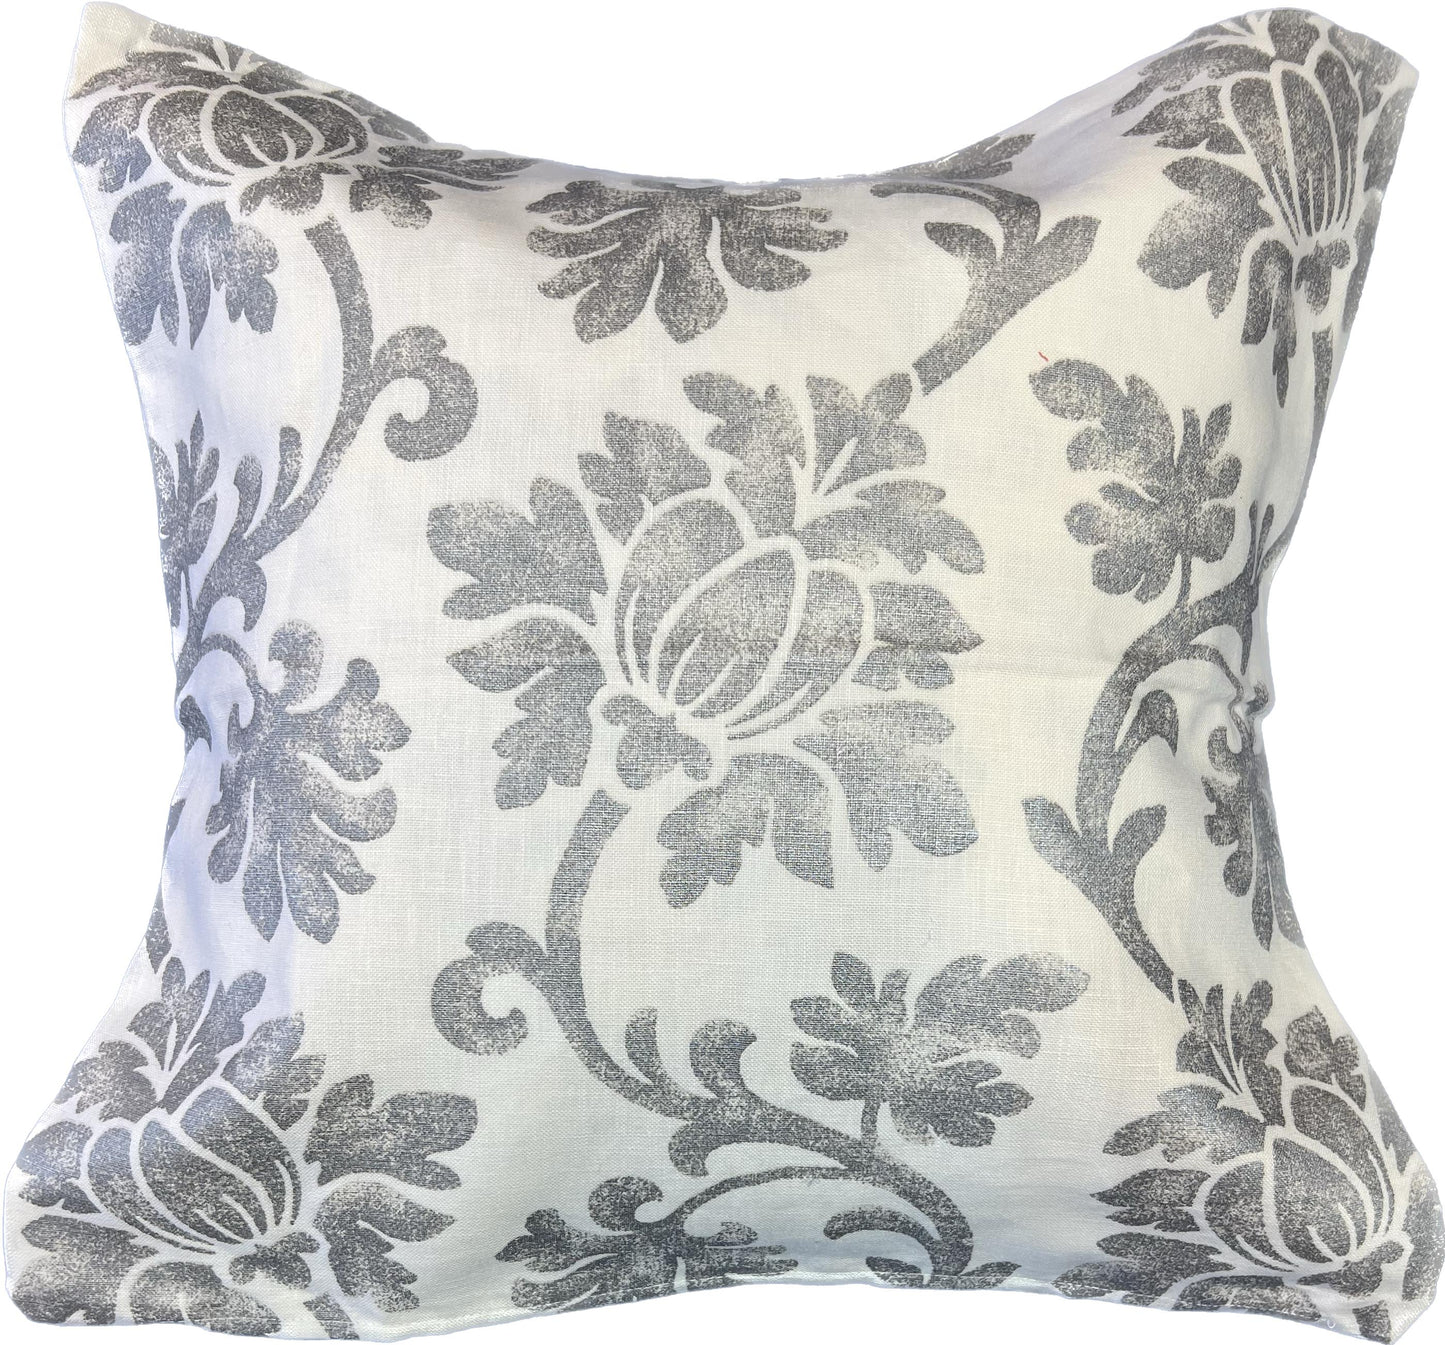 18"x18"  Floral Pattern Pillow Cover